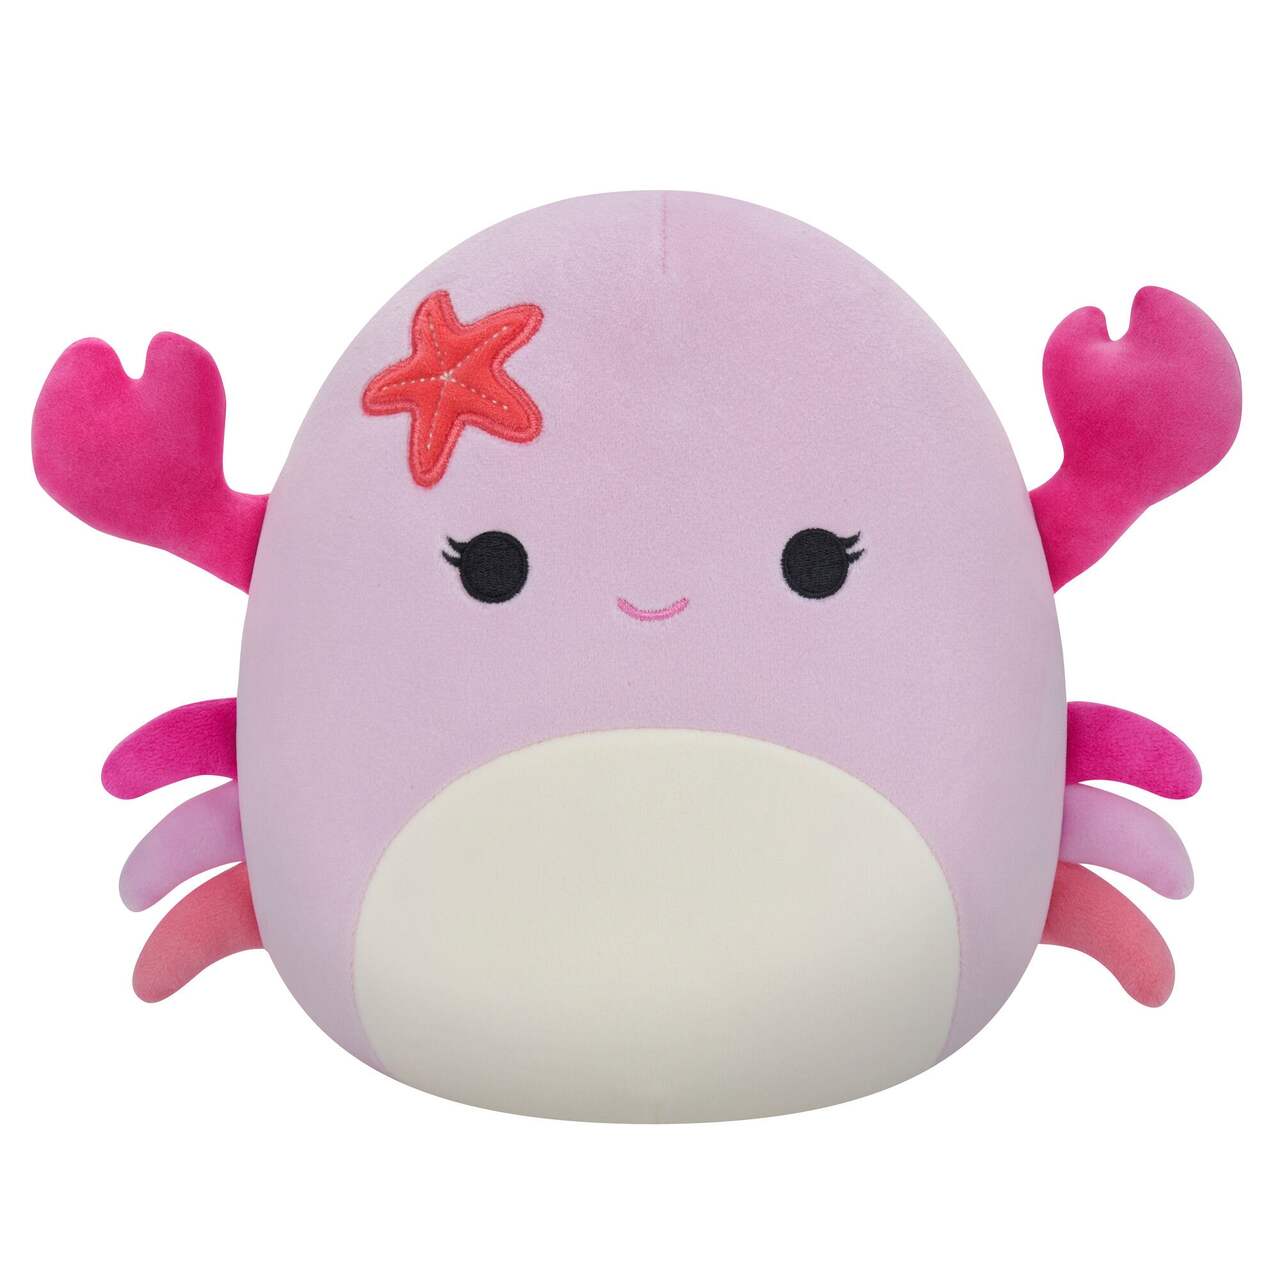 https://media-www.canadiantire.ca/product/seasonal-gardening/toys/preschool-toys-activities/0508299/squishmallow-8-plush-assorted-2ada976f-8238-4076-bf13-75ccca9030d9-jpgrendition.jpg?imdensity=1&imwidth=640&impolicy=mZoom